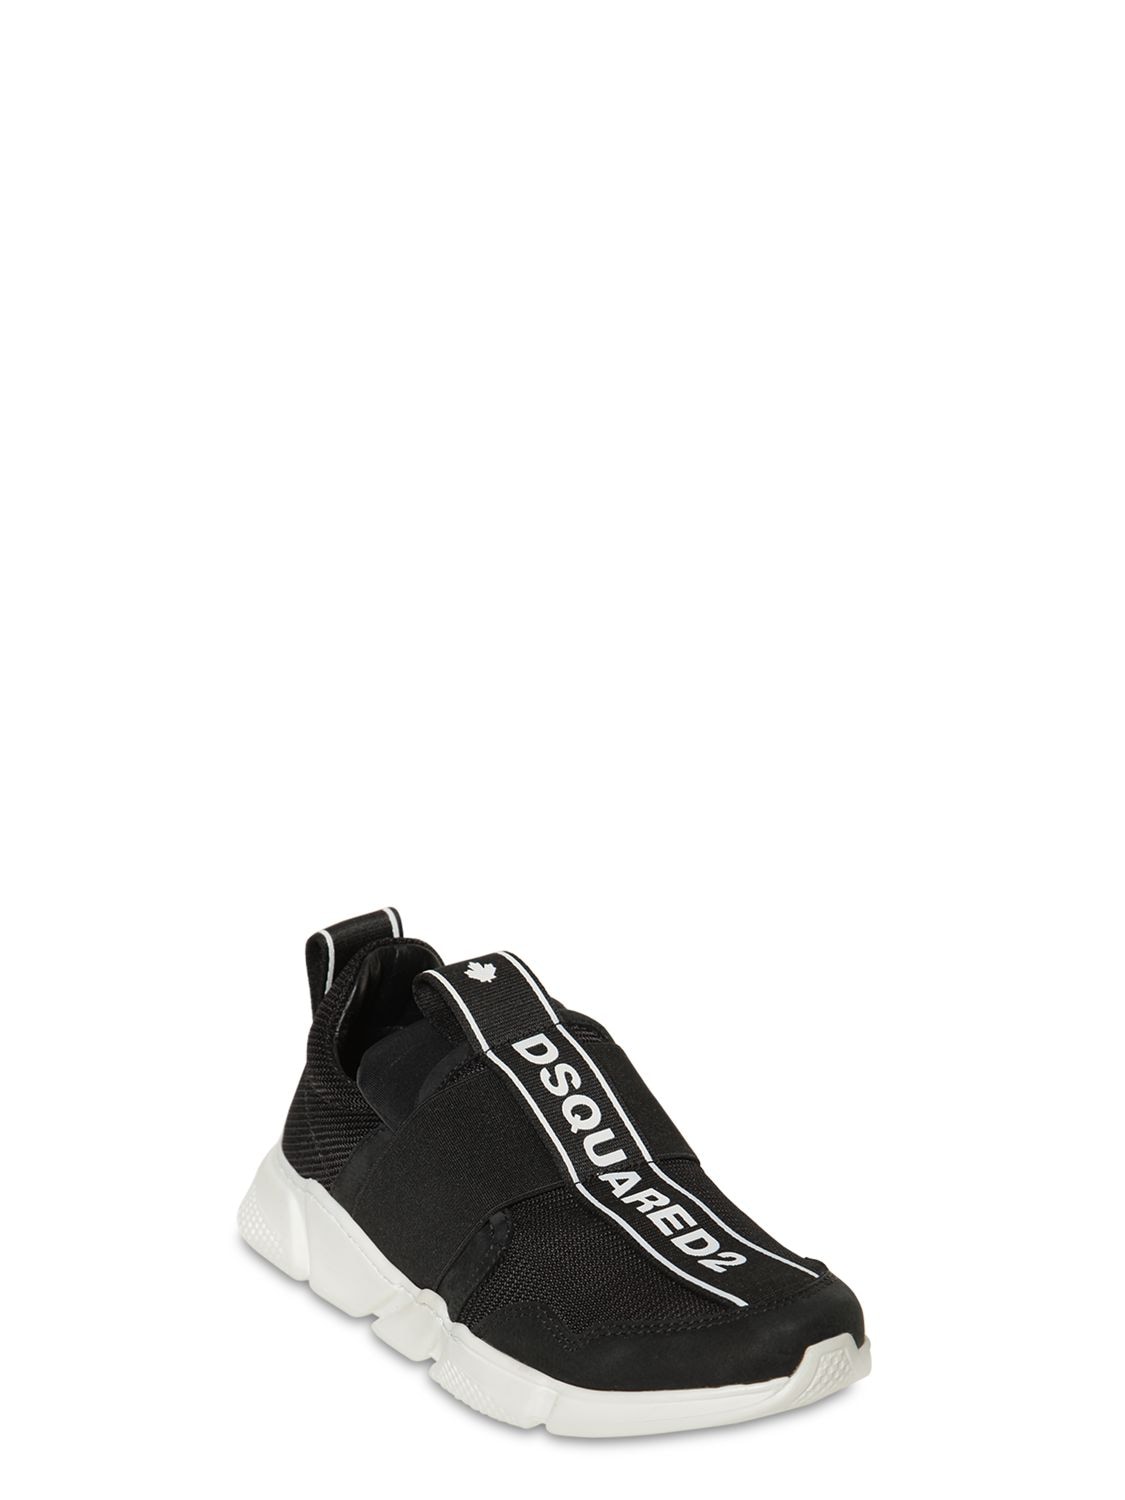 Dsquared2 Kids' Slip-on Sneakers W/ Elastic Bands In Black